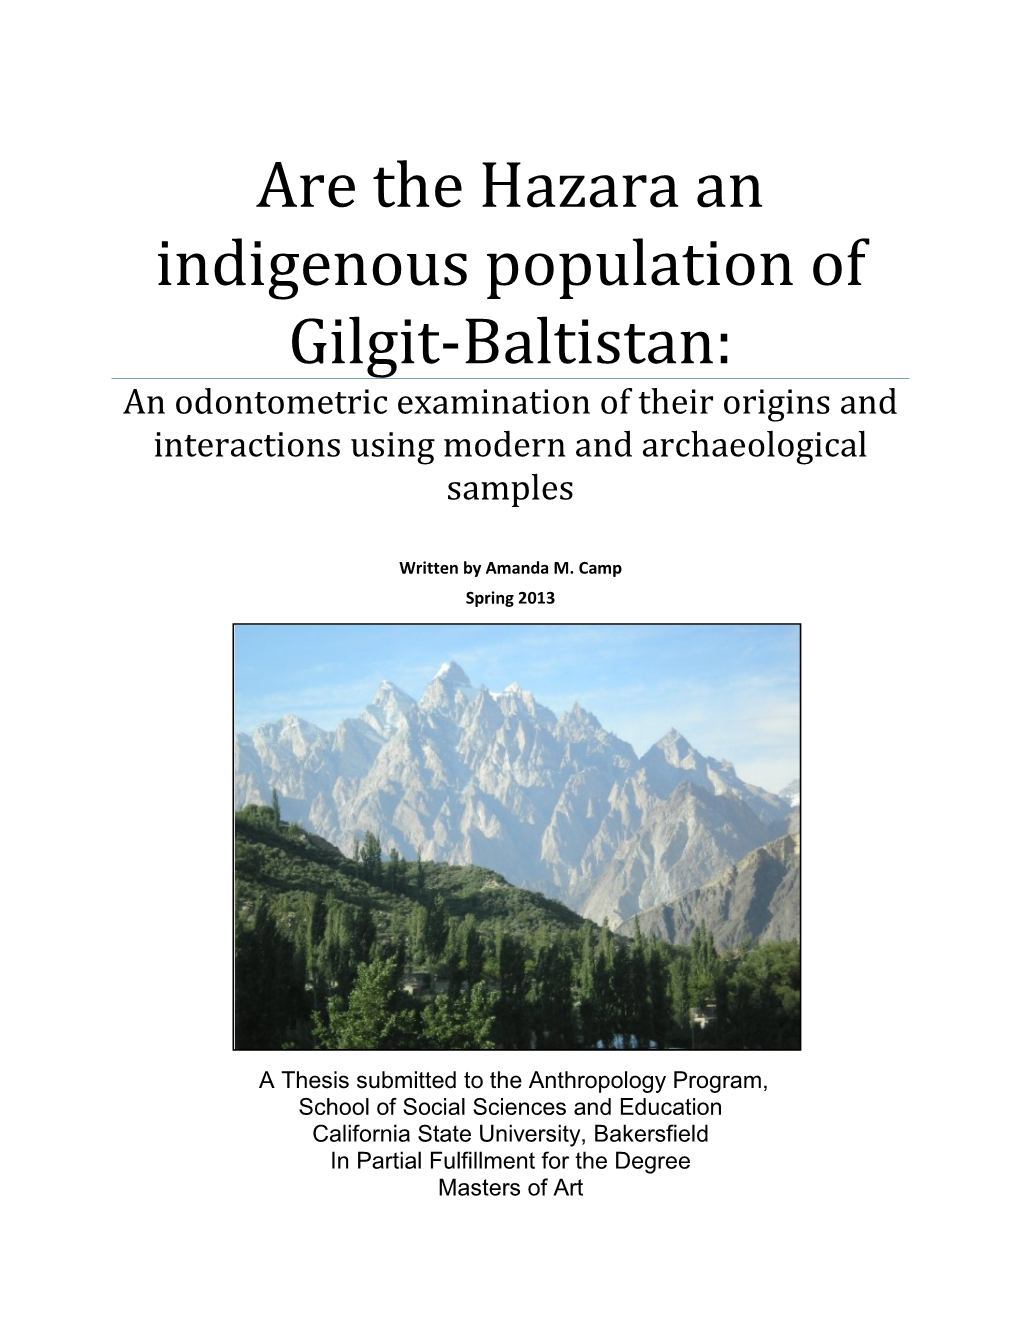 Are the Hazara an Indigenous Population of Gilgit-Baltistan: an Odontometric Examination of Their Origins and Interactions Using Modern and Archaeological Samples